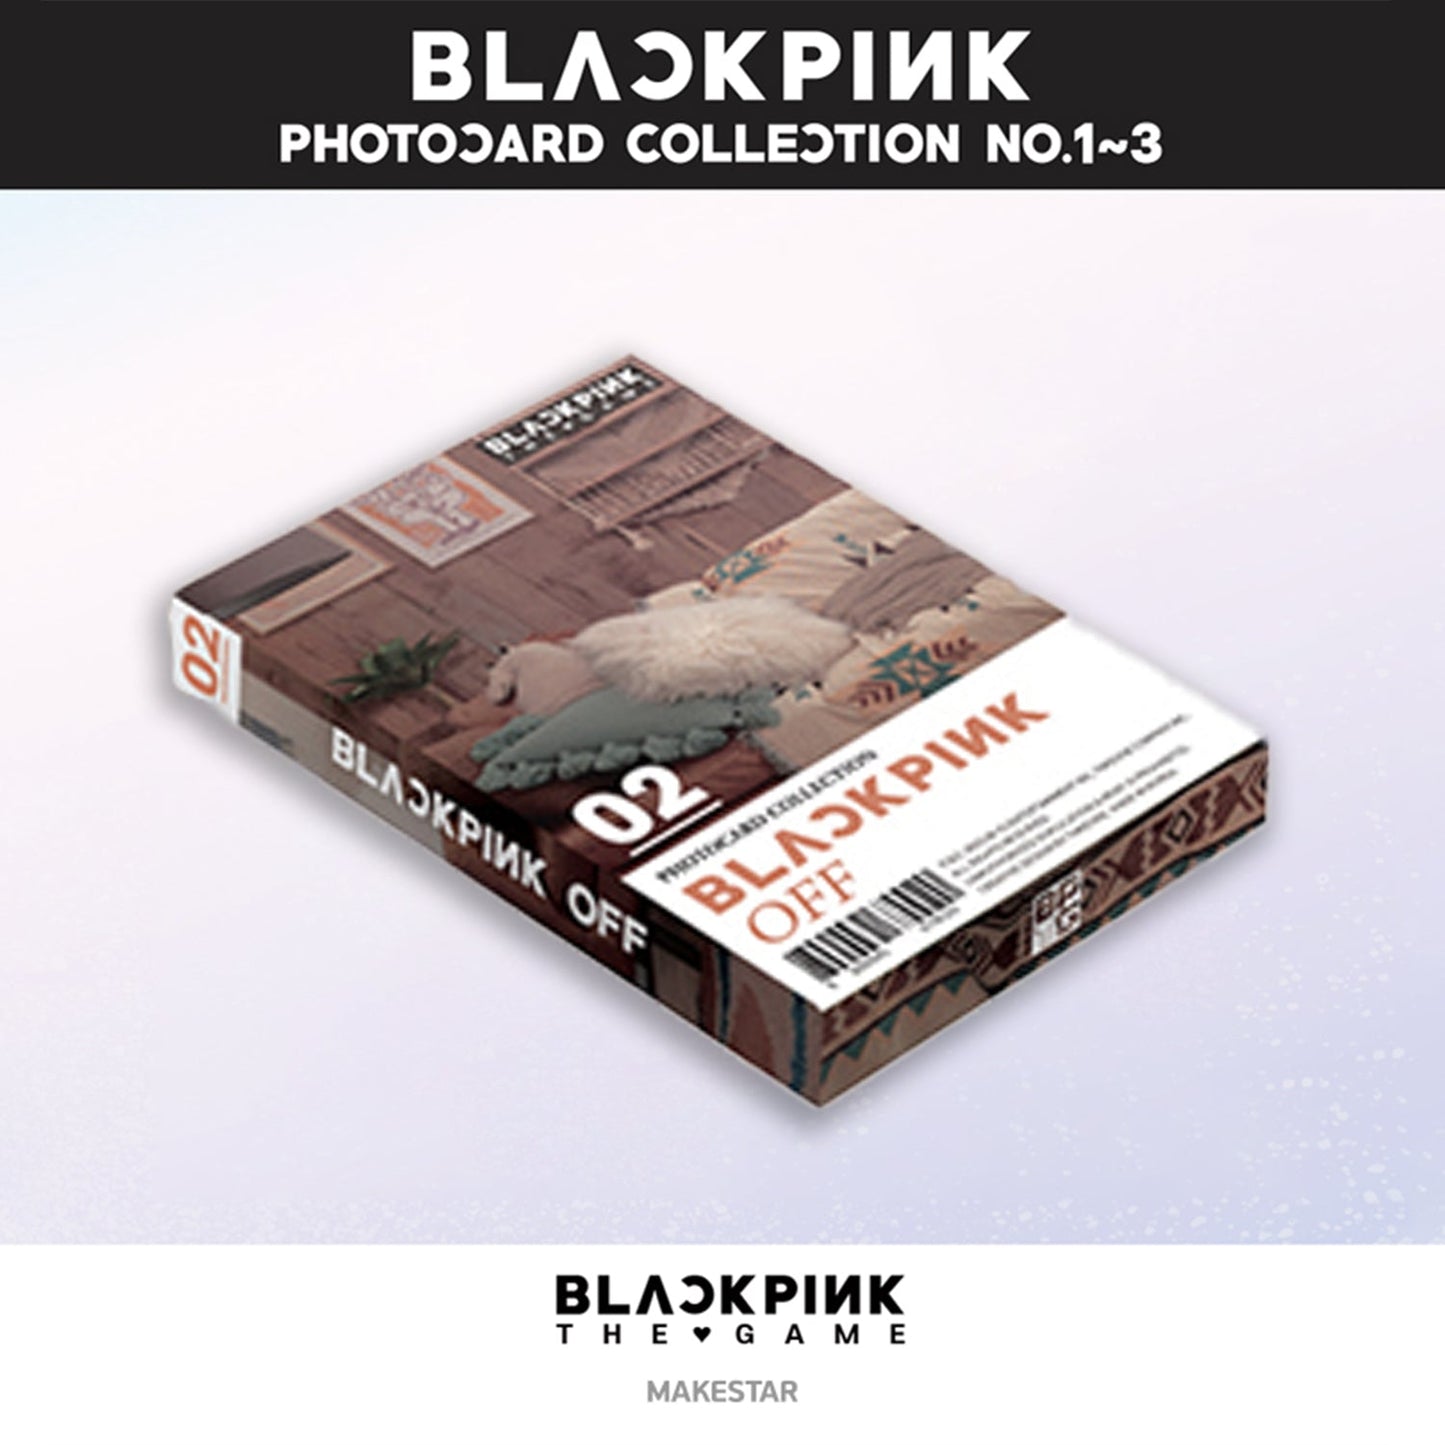 BLACKPINK THE GAME O.S.T. (PHOTOCARD COLLECTION) VERSION 2 COVER